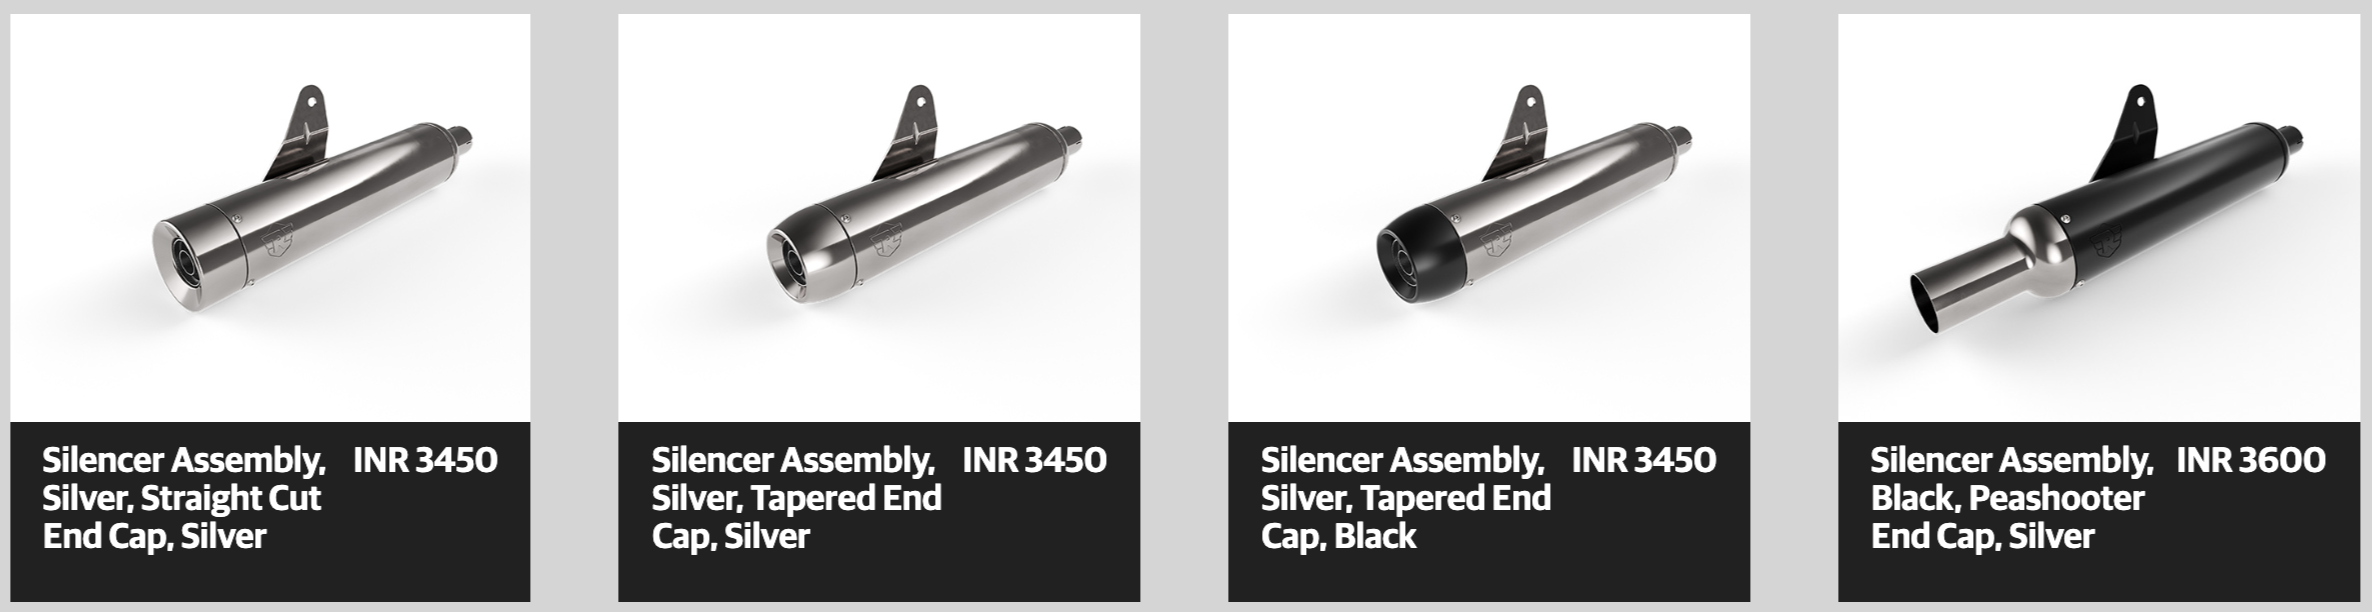 BS3 and BS4 Royal Enfield Classic 350 Silencers Price List - snap